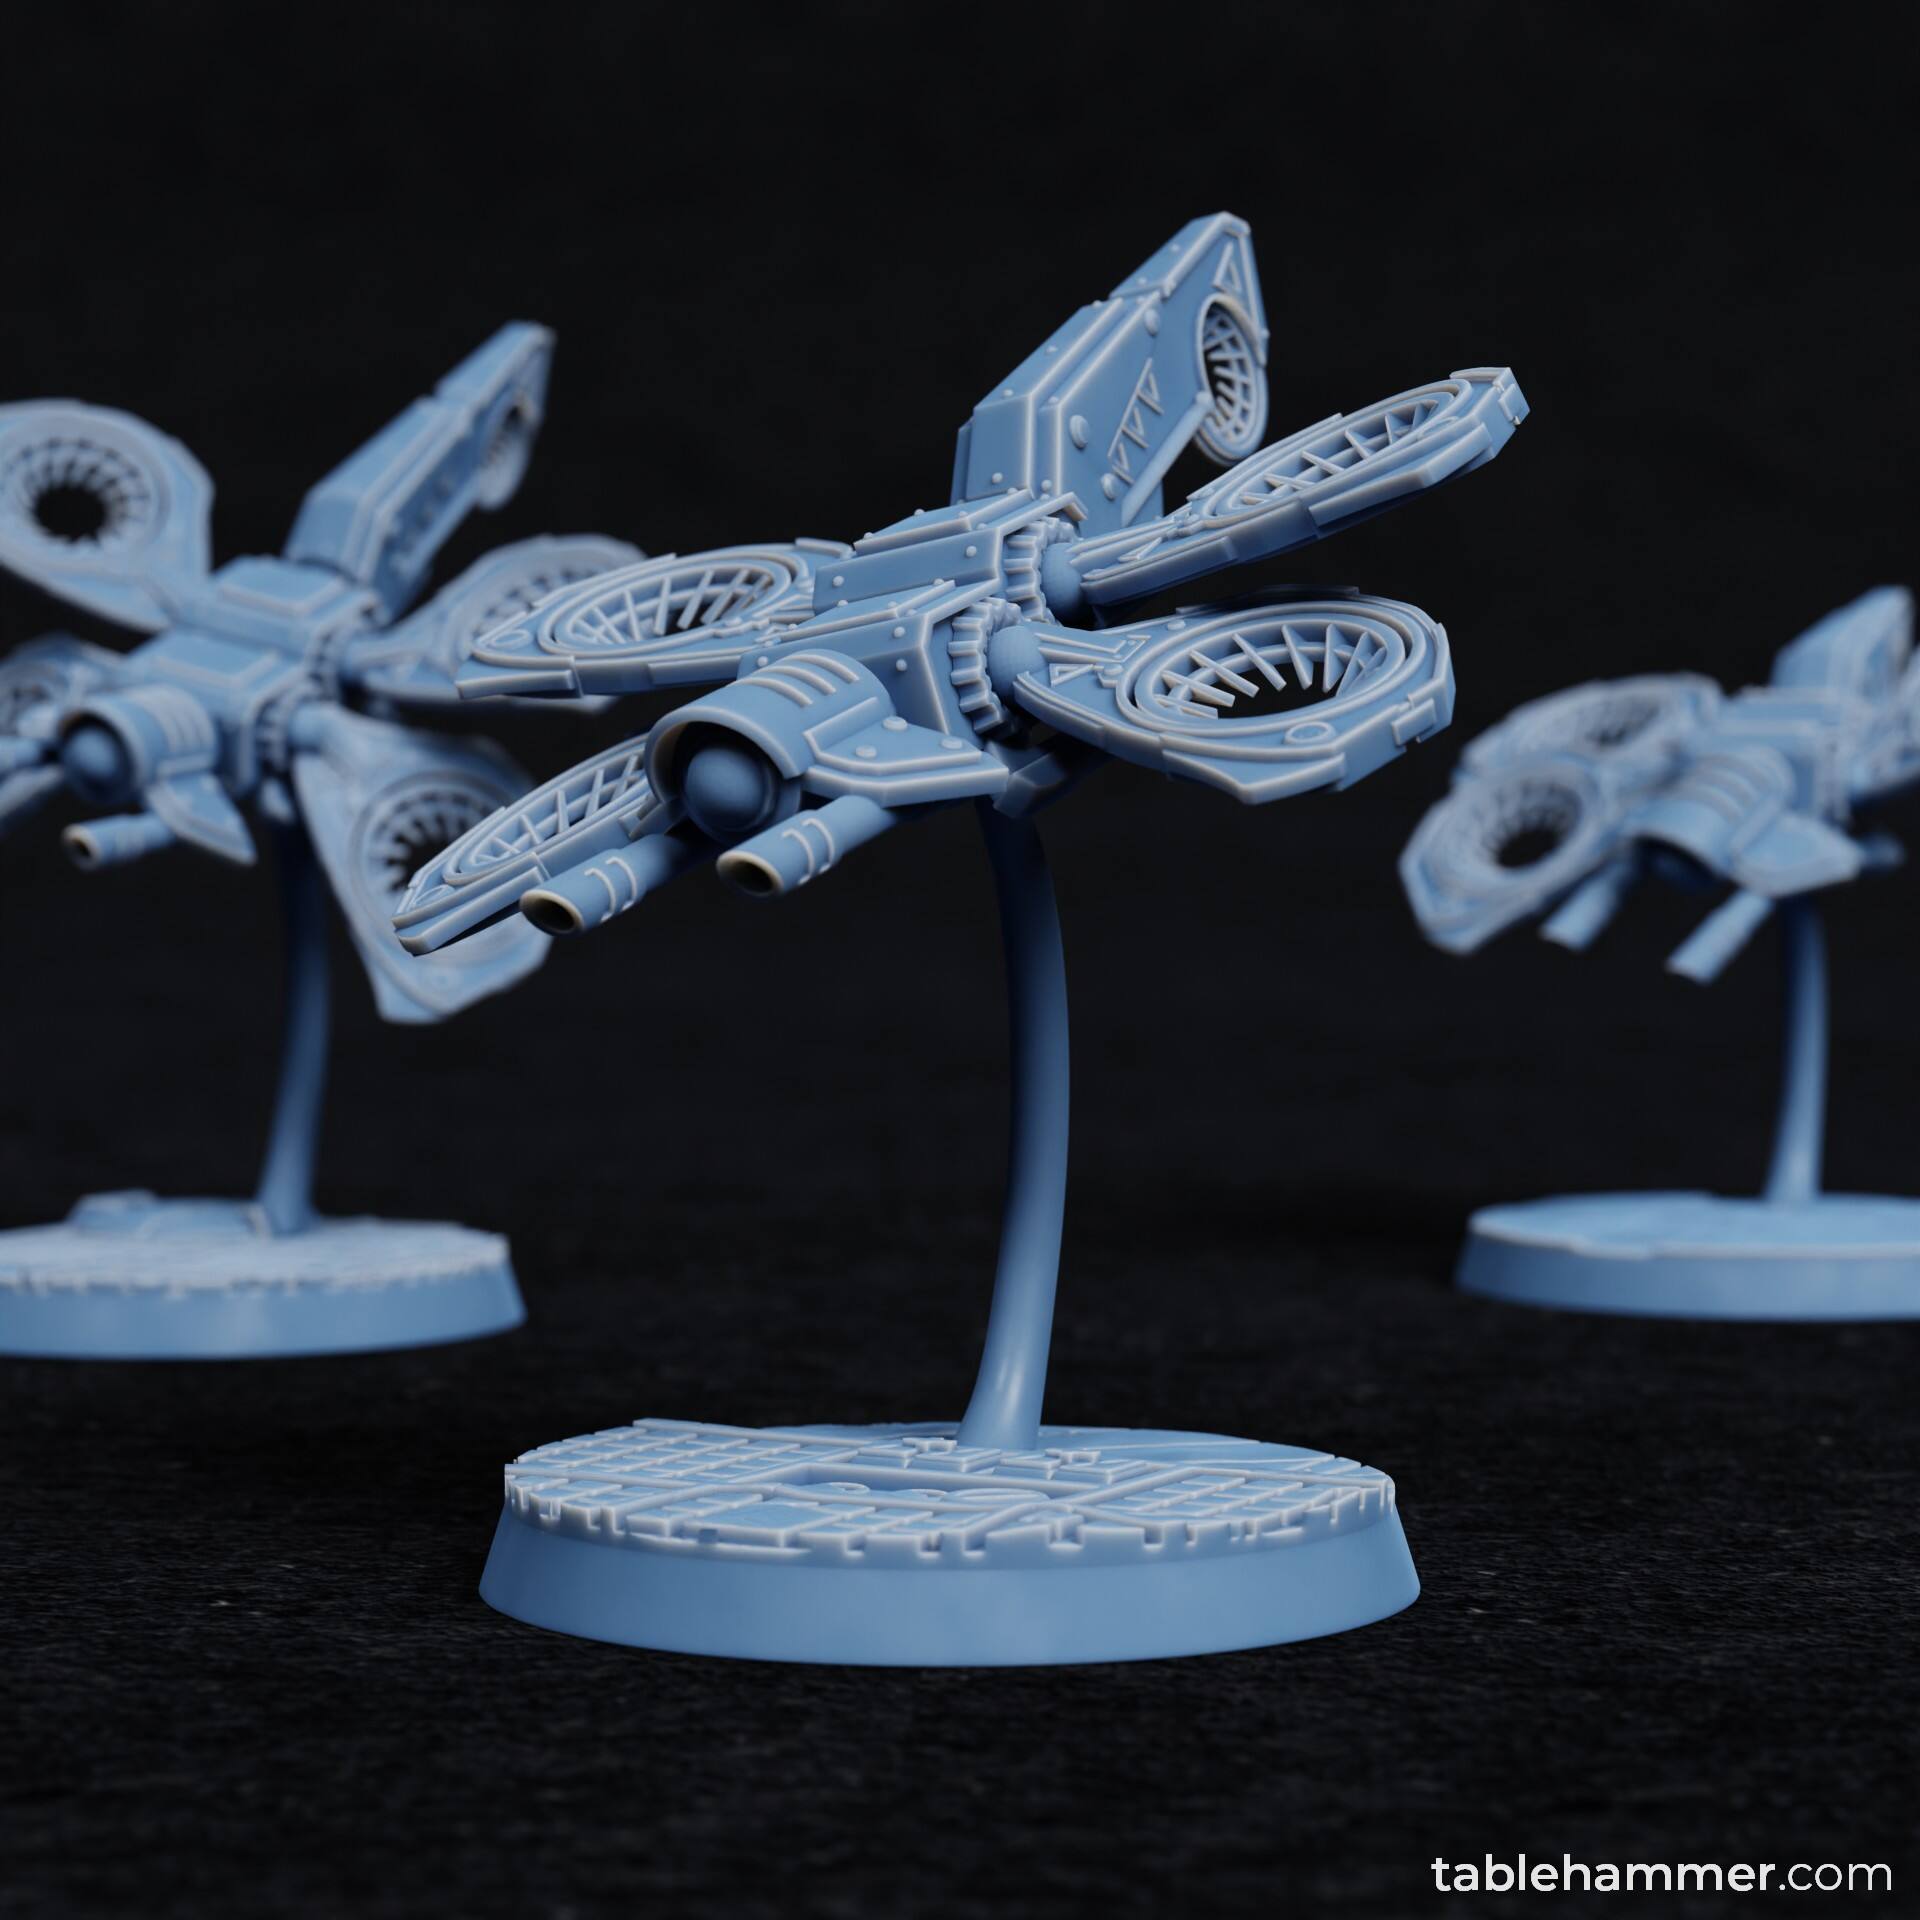 Dragons - heavy combat drones (Accell Union)